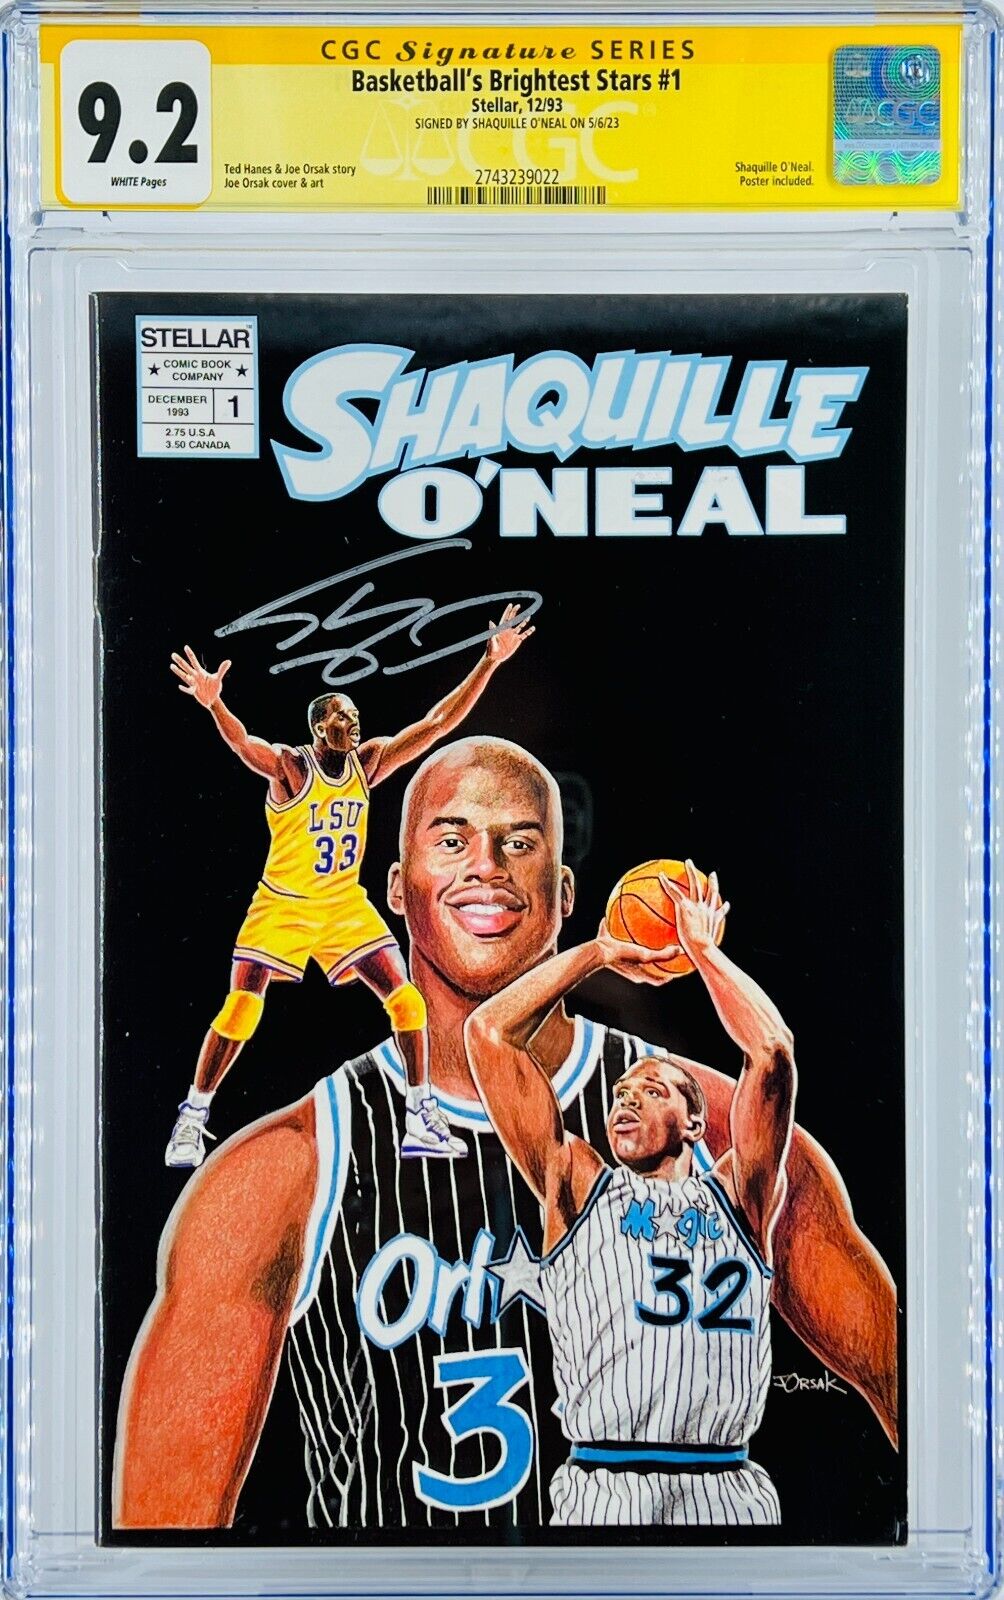 Shaquille O'Neal Signed CGC SS Basketball's Brightest Stars #1 Grade 9.2